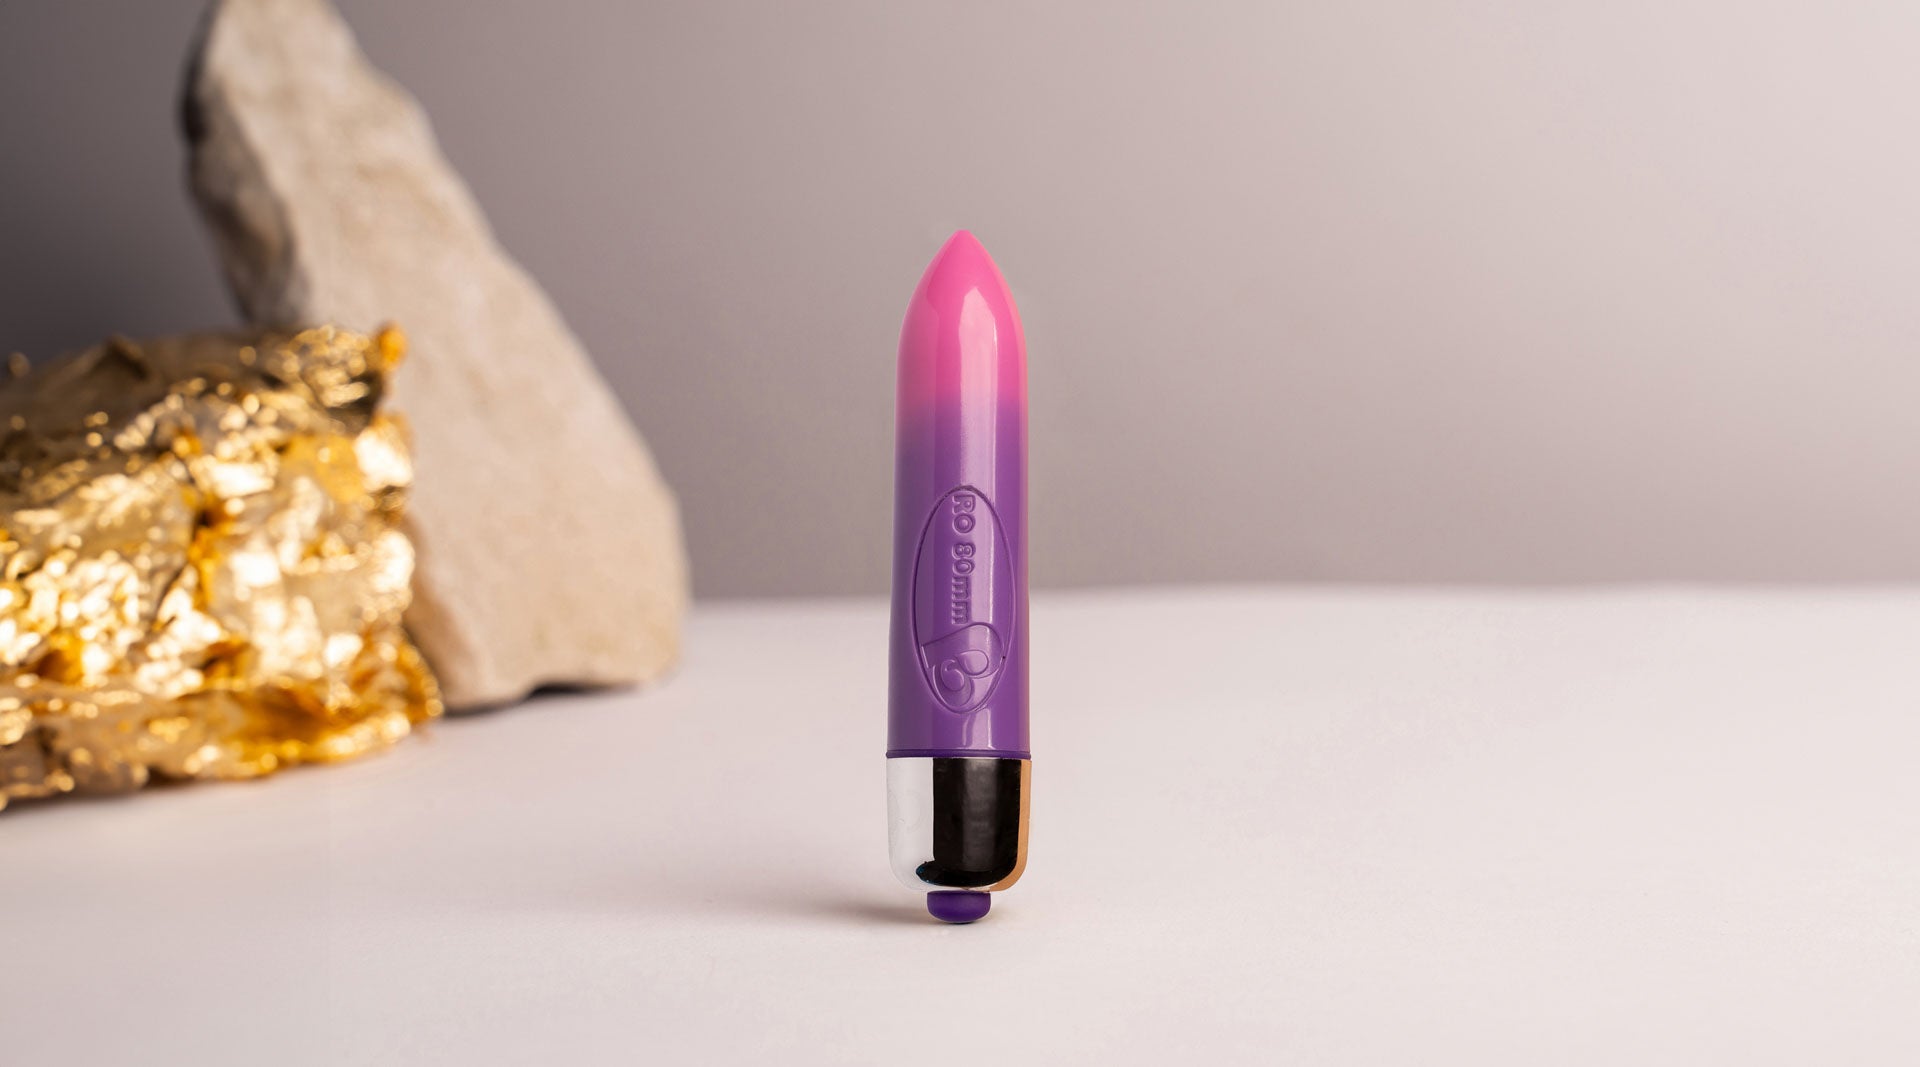 Small bullet vibrator in colour changing pink and purple.